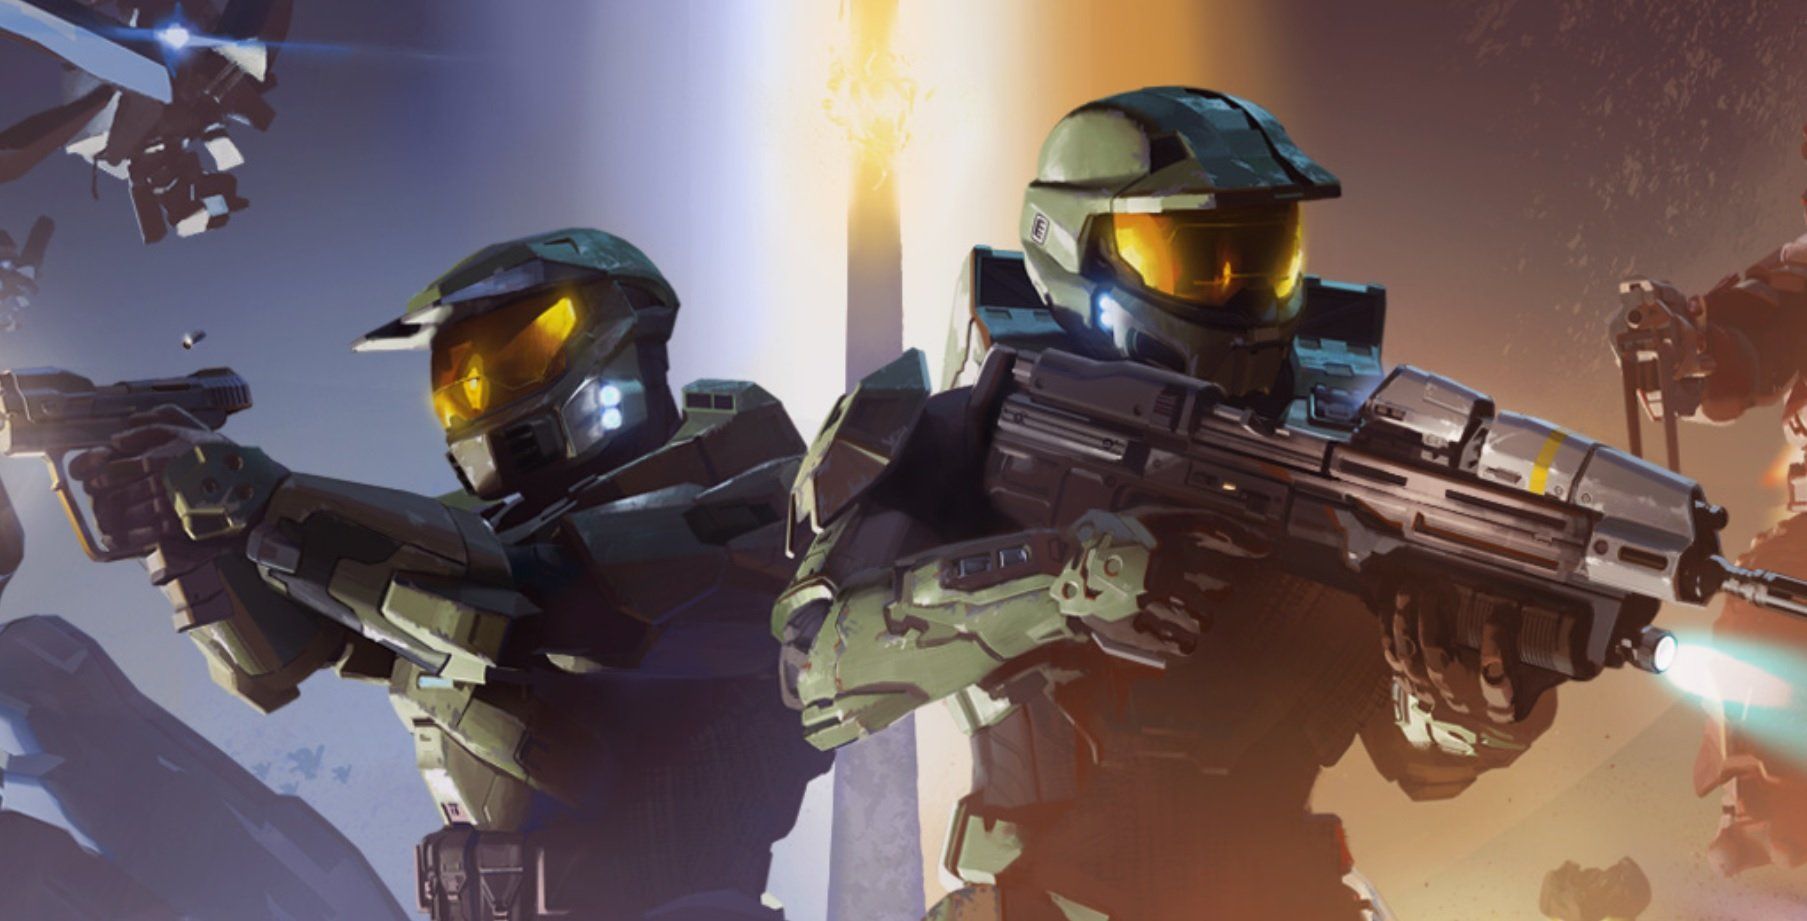 Halo turns 20 this year, and Microsoft is celebrating with a bangin' wallpaper Gamers Grade